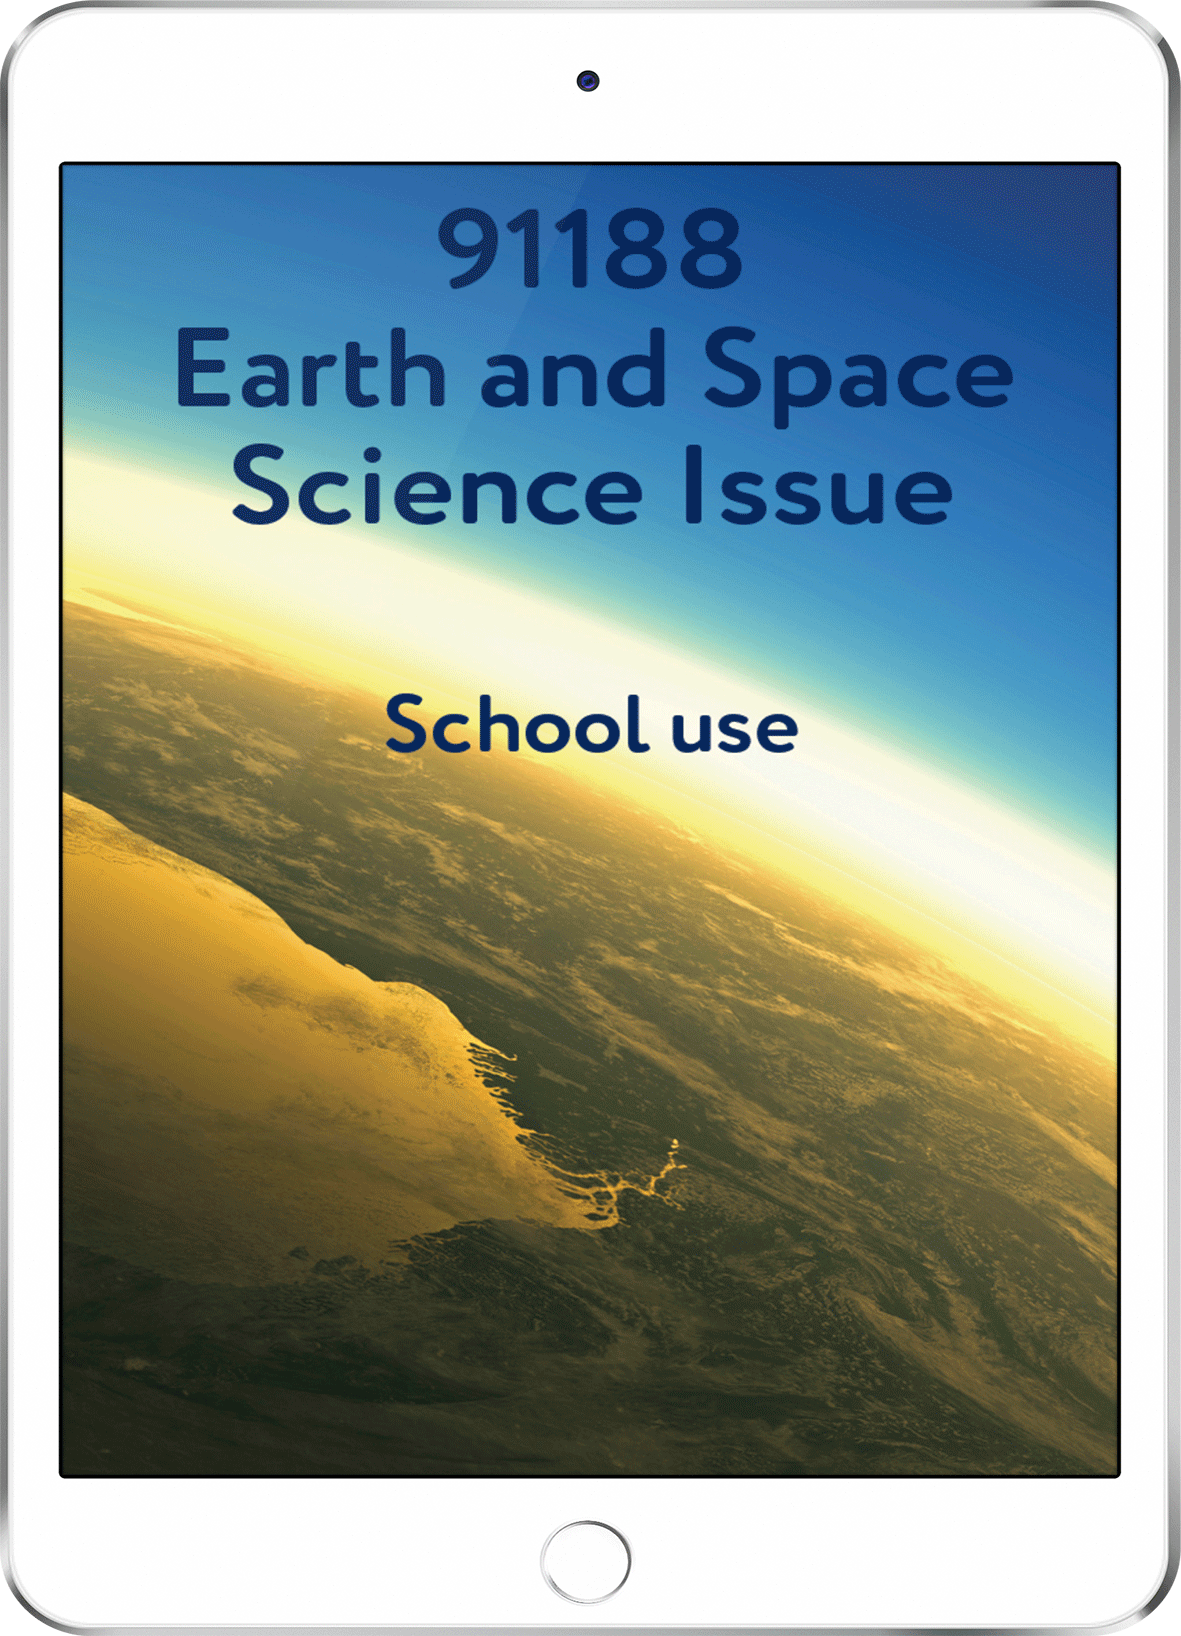 91188 Earth and Space Science Issue - School Use